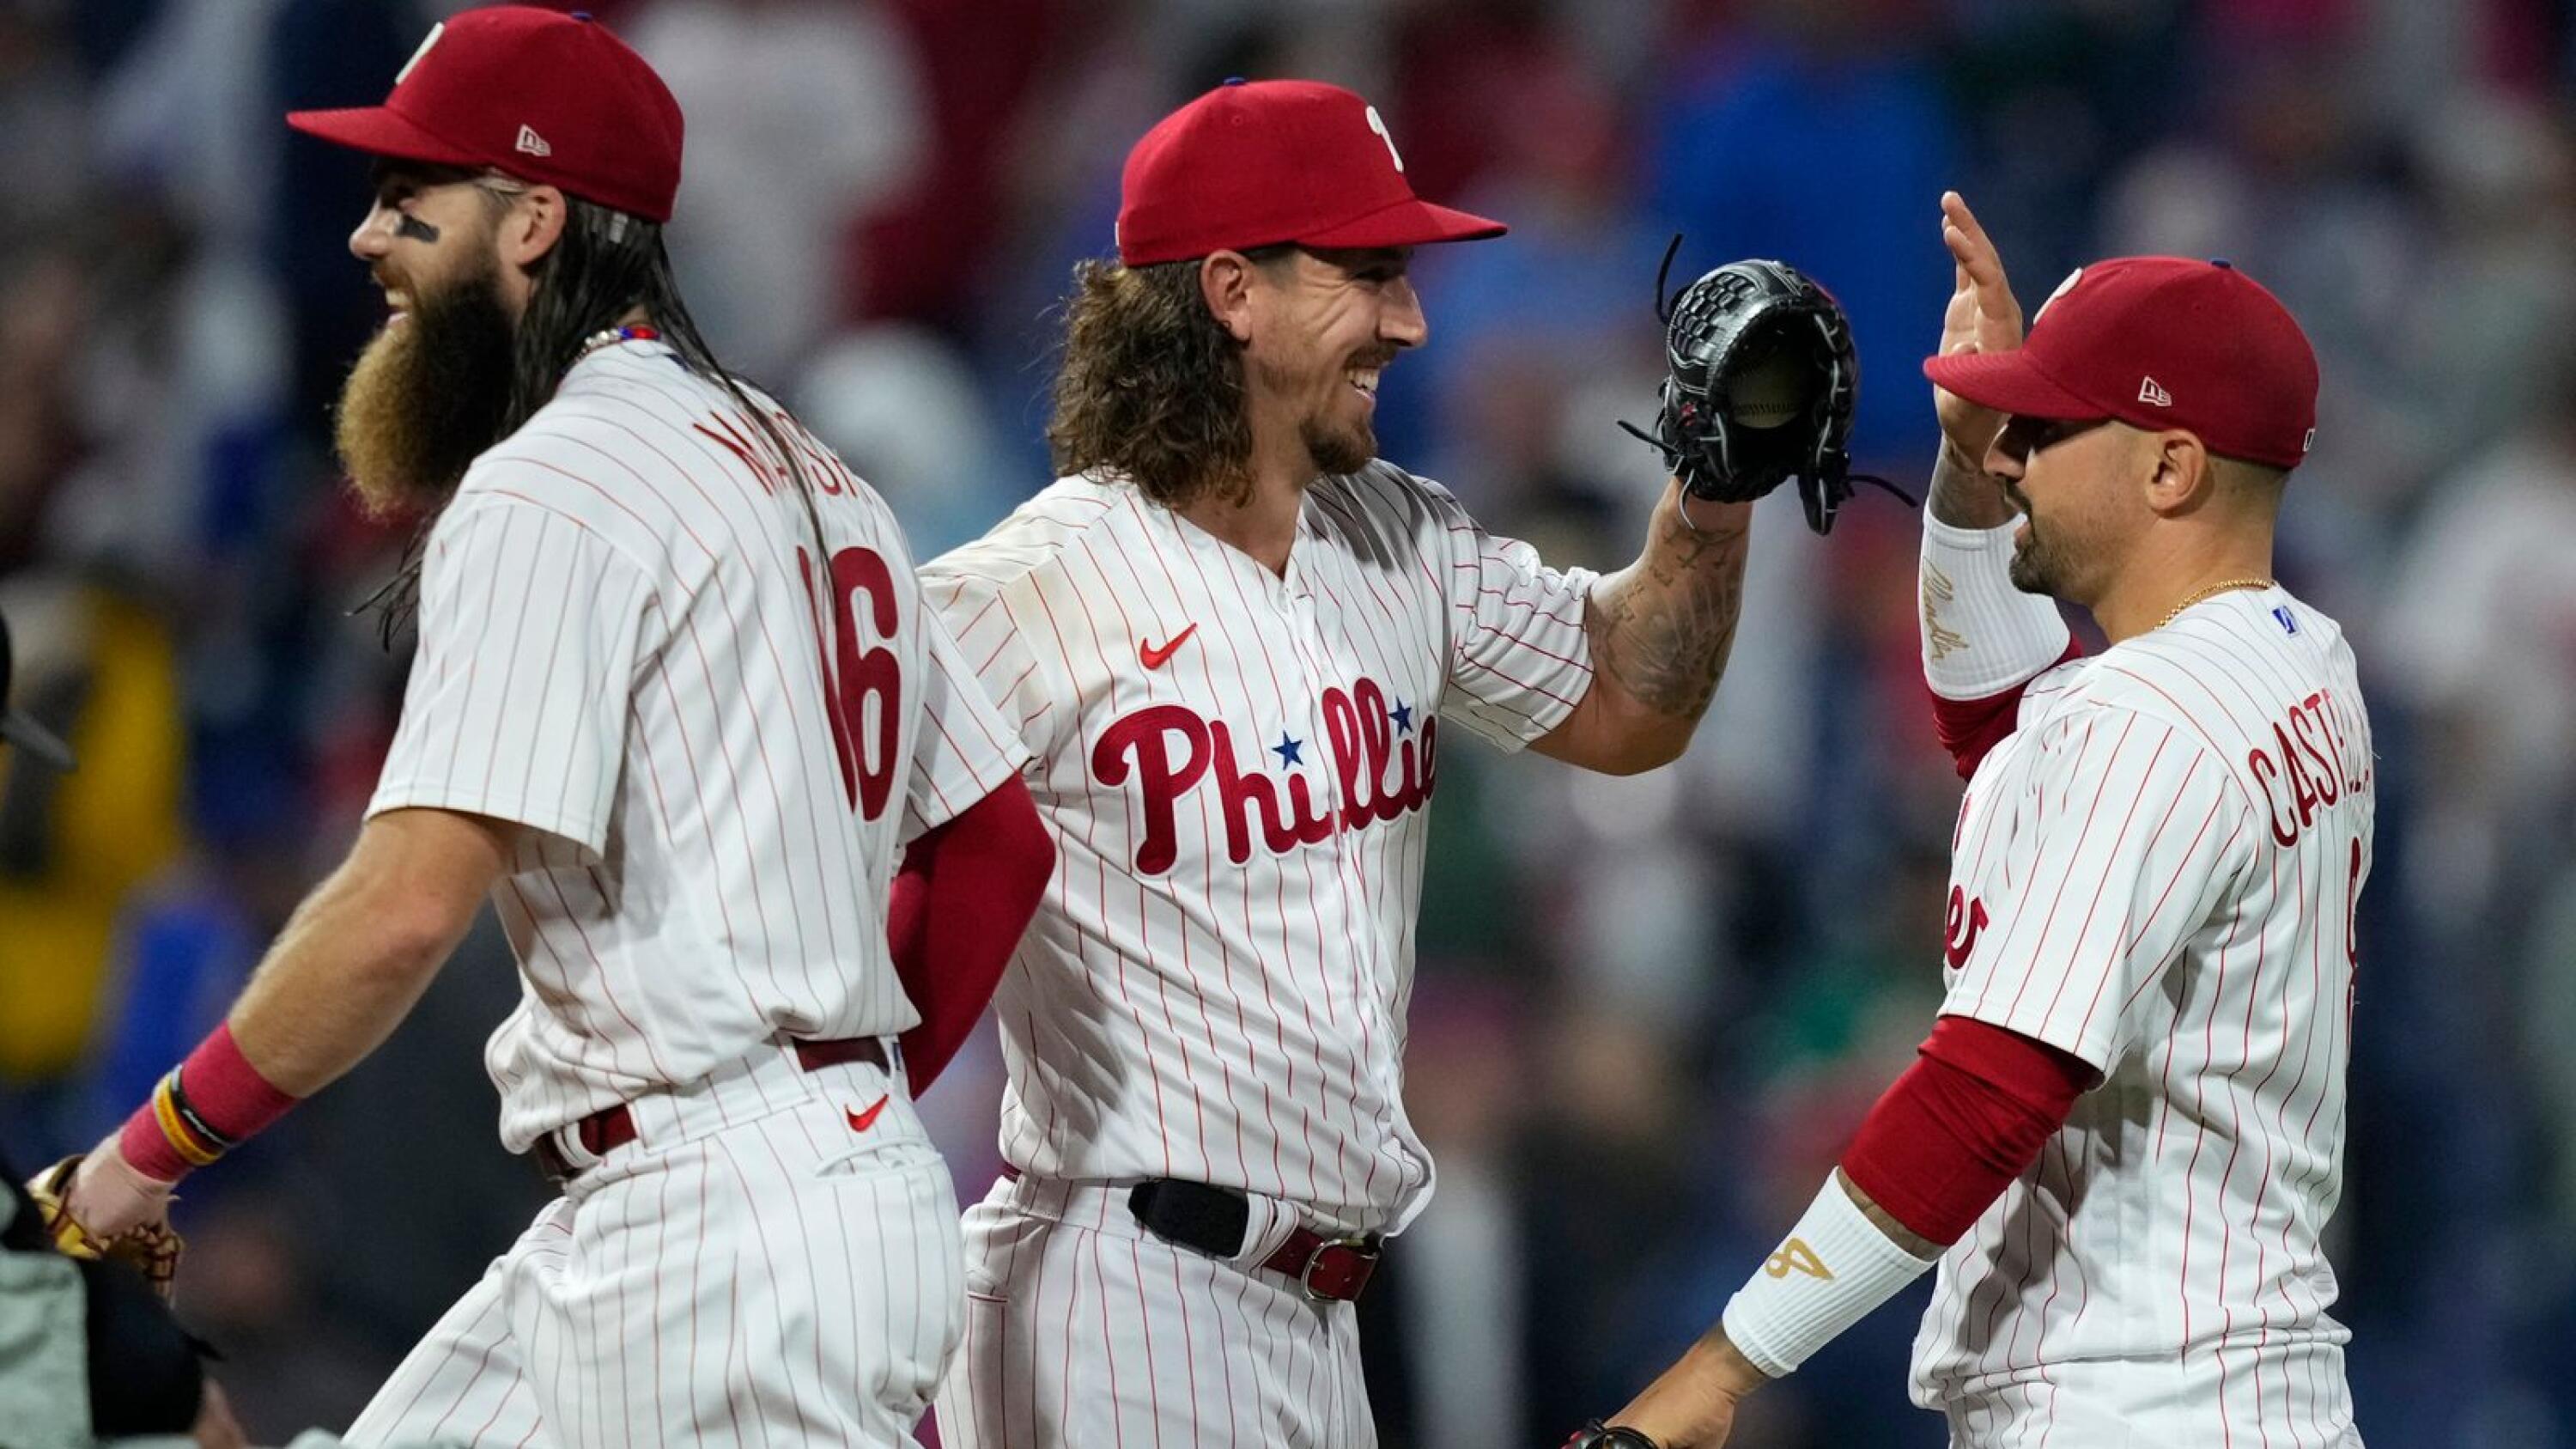 Phillies move to brink of playoff spot with 5-2 win over Mets